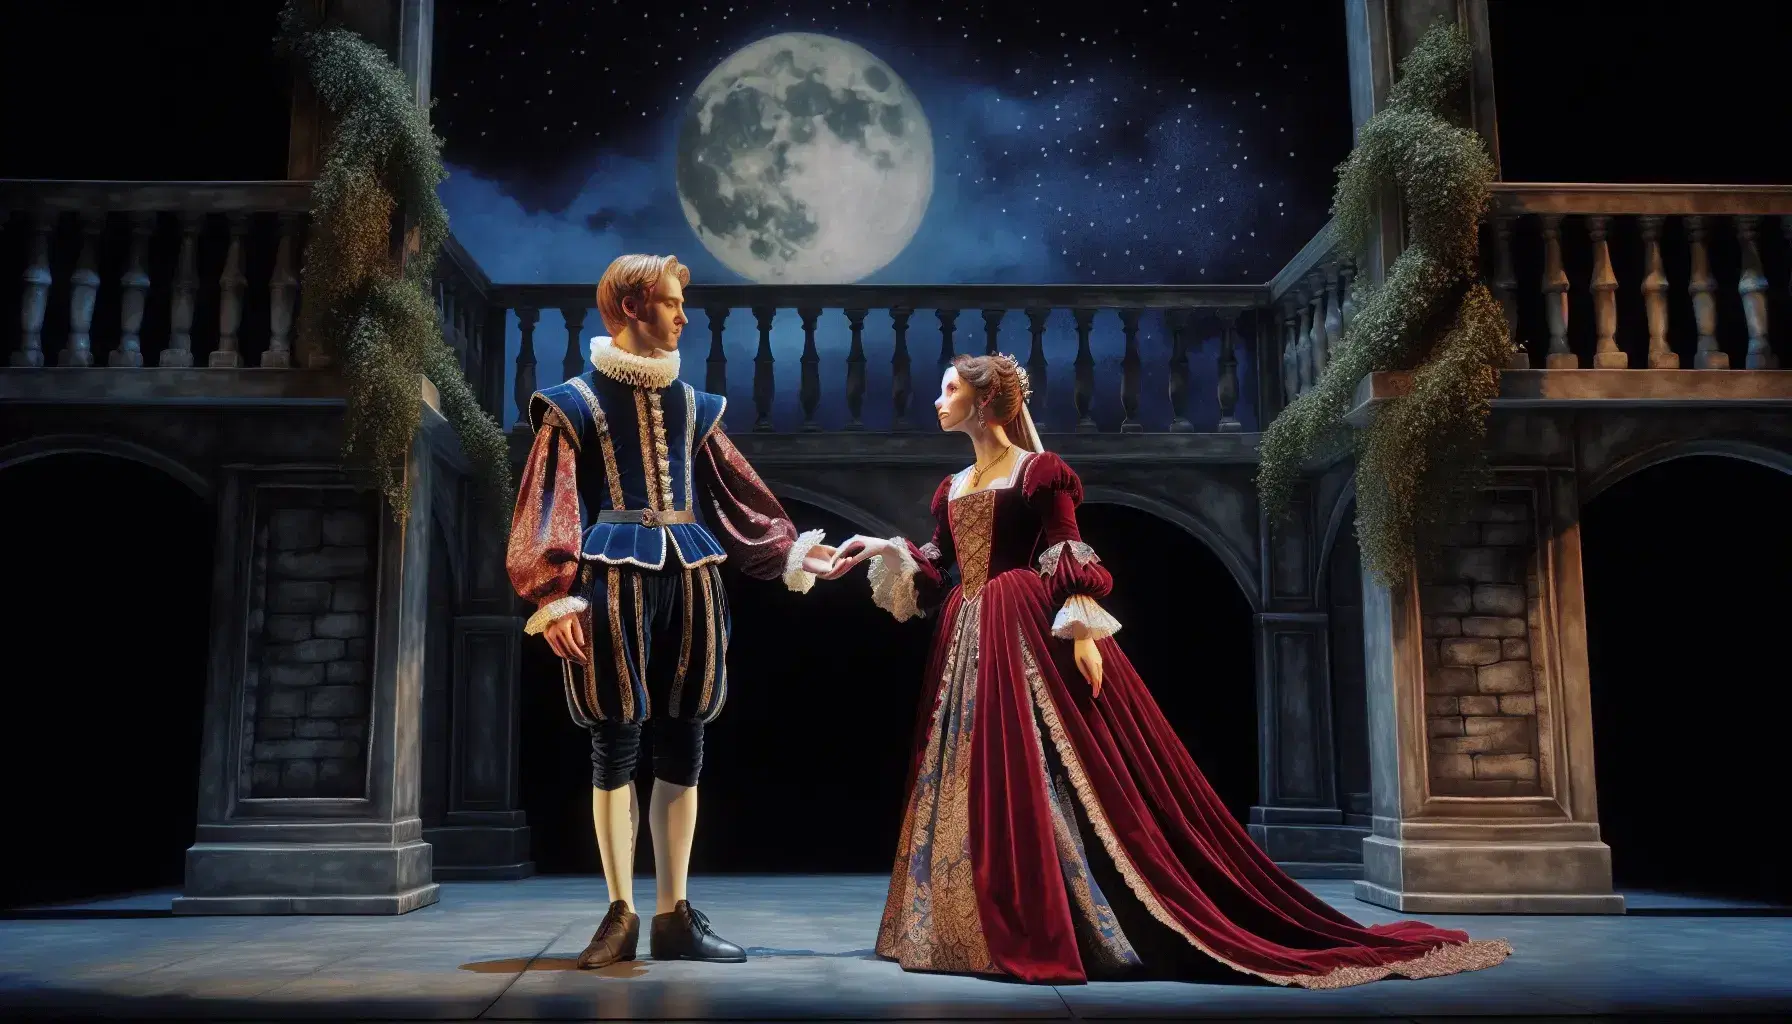 Romantic scene of Romeo and Juliet on a theater stage with Elizabethan costumes, fake balcony and moonlighting.